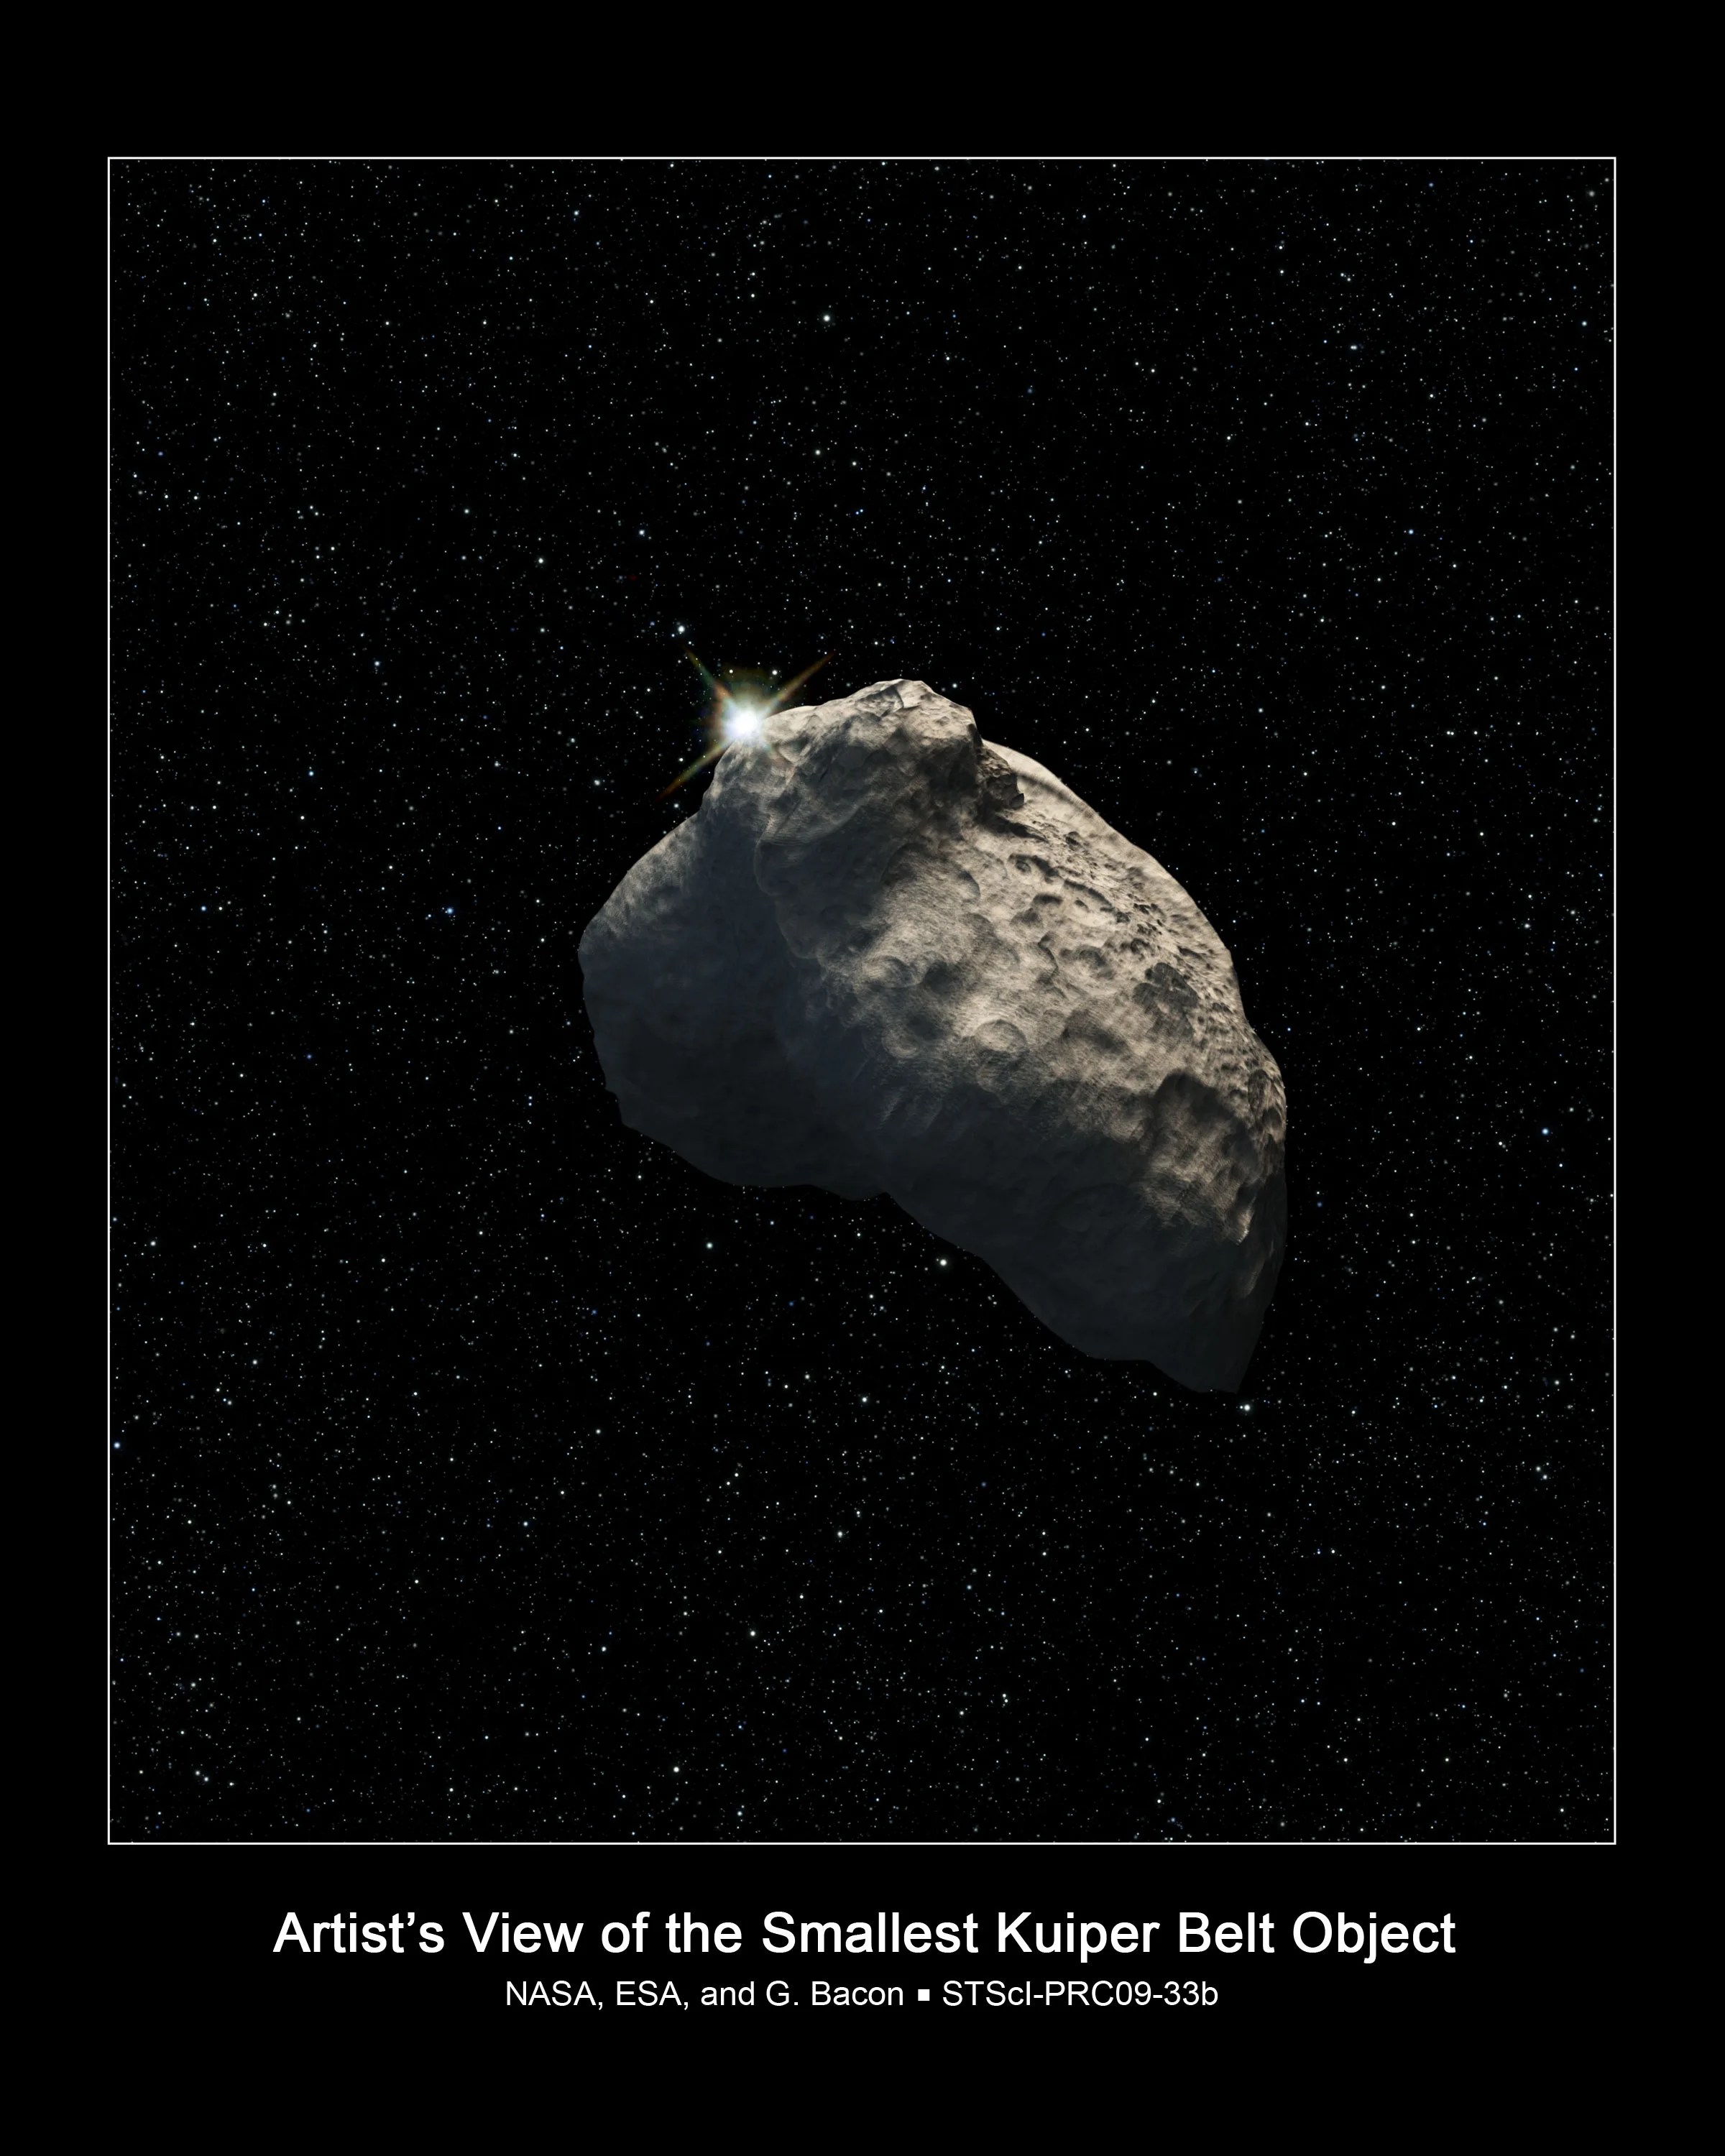 Artist's concept of the smallest object discovered in the Kuiper Belt.